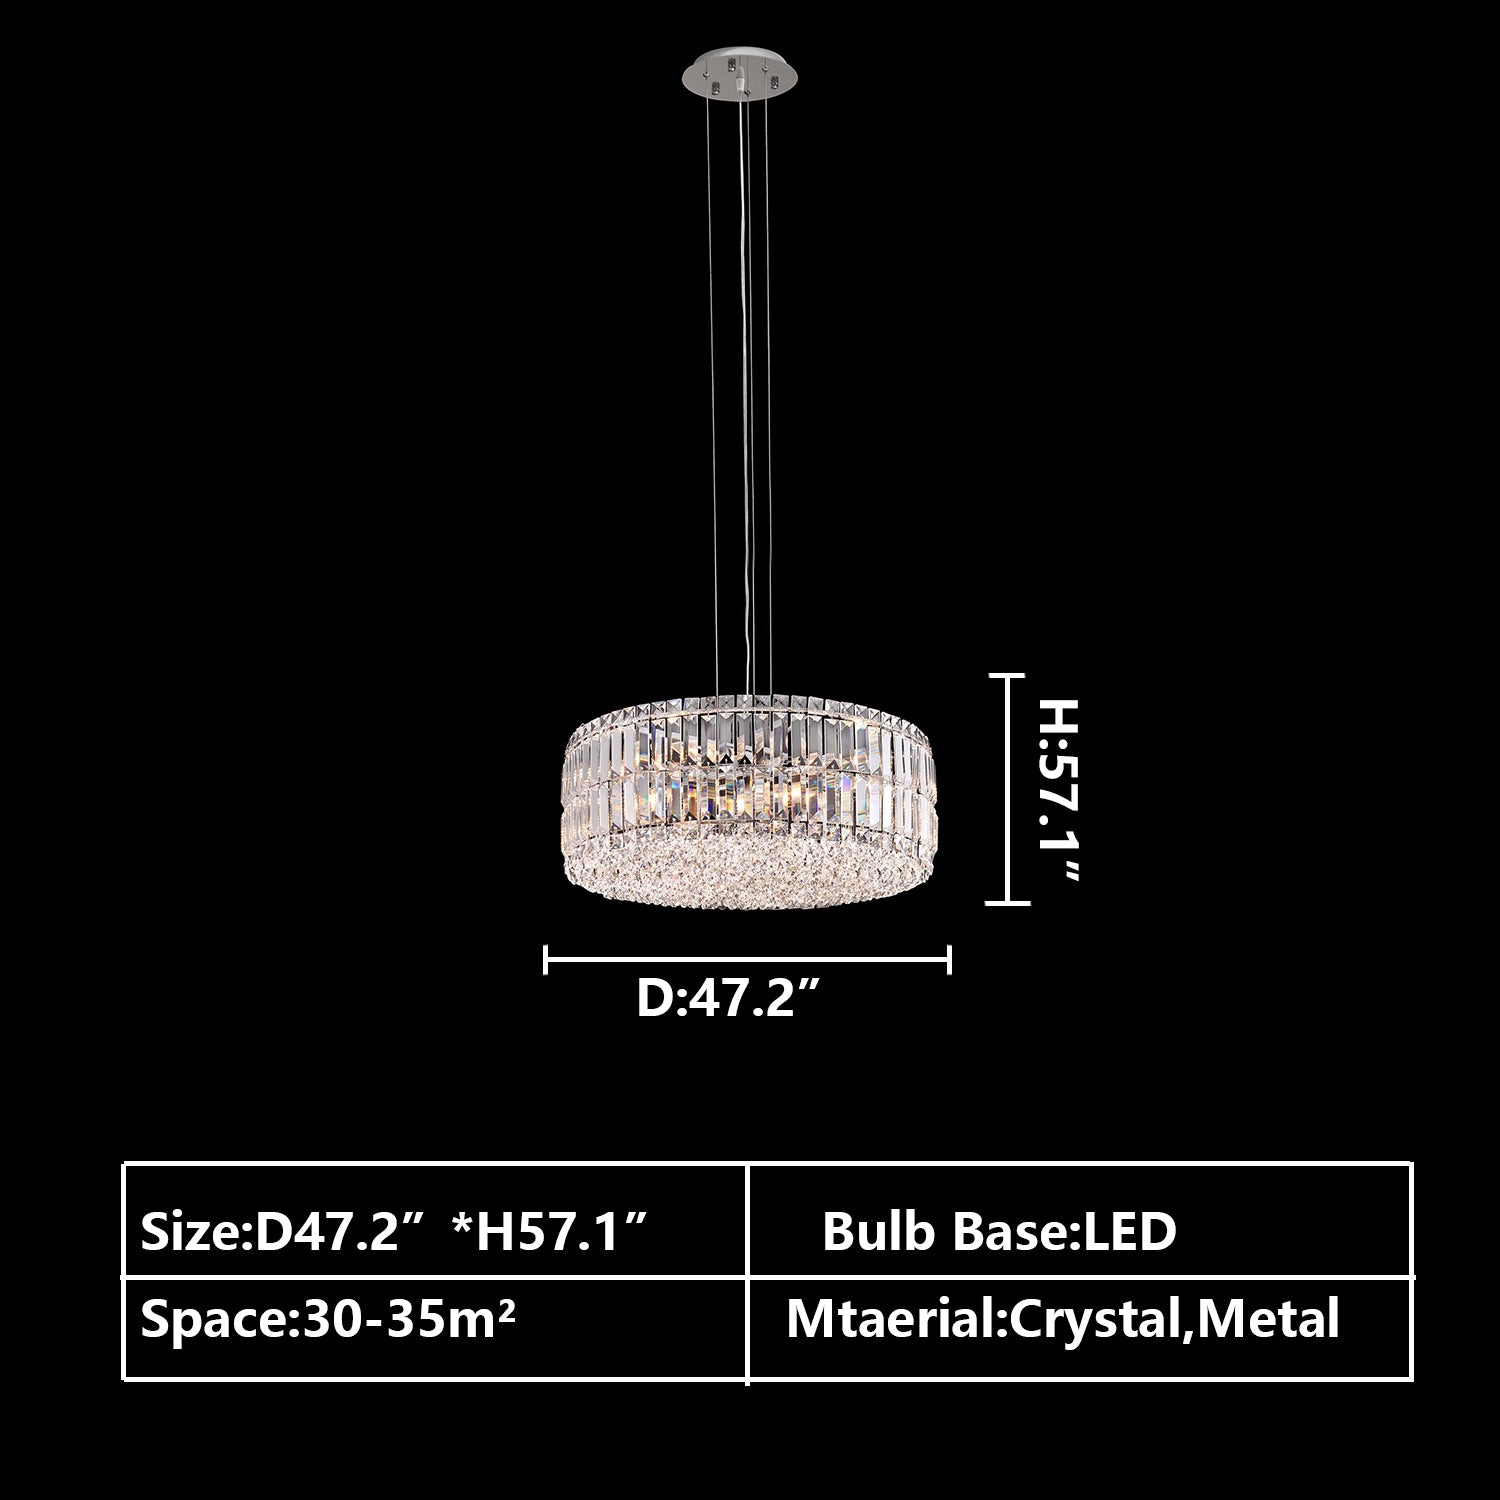 Round:D47.2"*H57.1" chandelier,chandeliers,pendant,round,oval,ceiling,crystal,metal,chrome,silver,clear crystal,adjustable,chain,light luxury,luxury,living room,dining room,foyer,entrys,hallway,bathroom,bedroom,home office